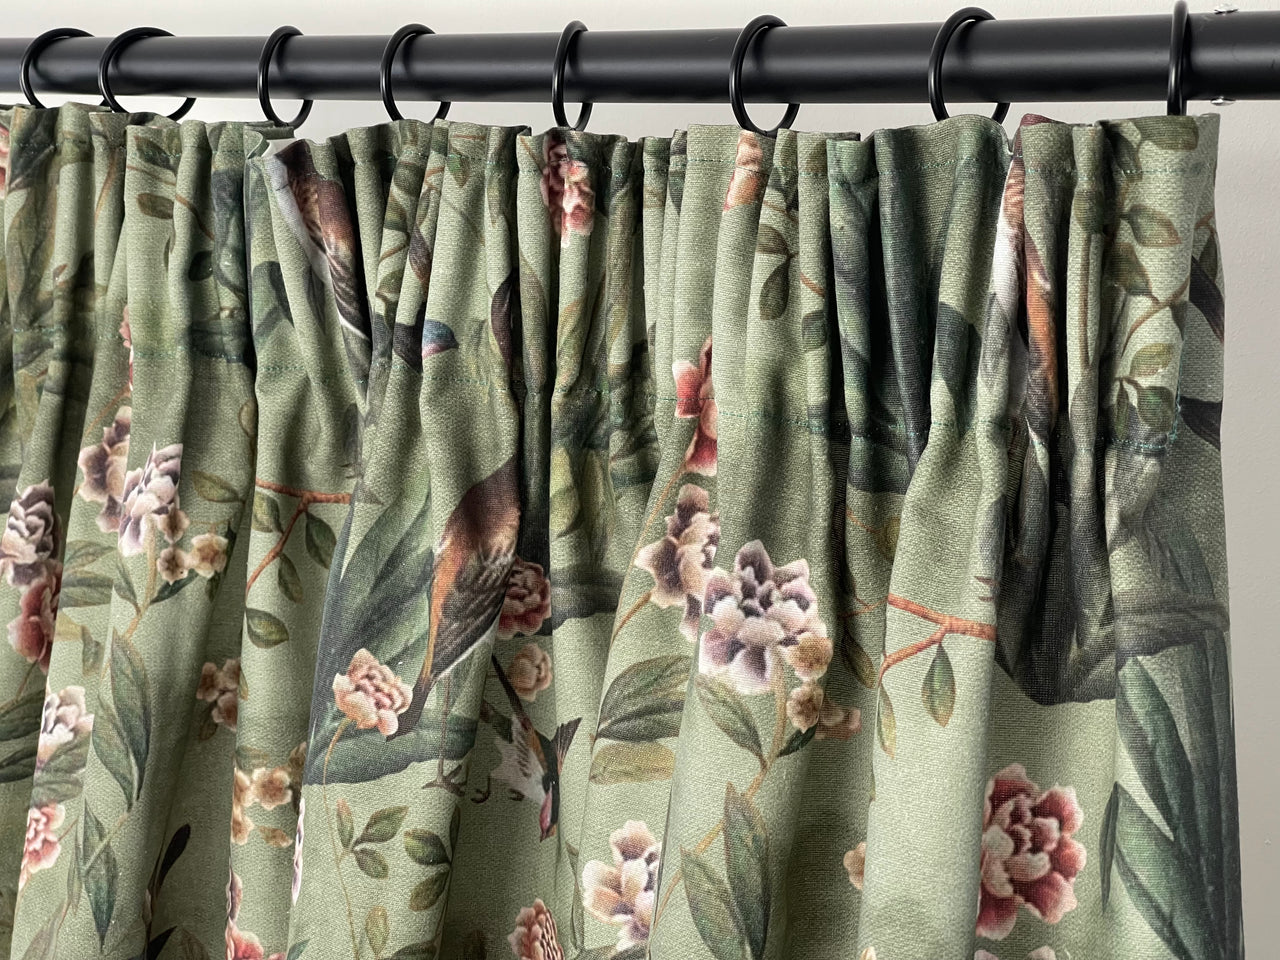 Vintage-Style Goose Botanical Cotton Curtains - Custom Made to Measure